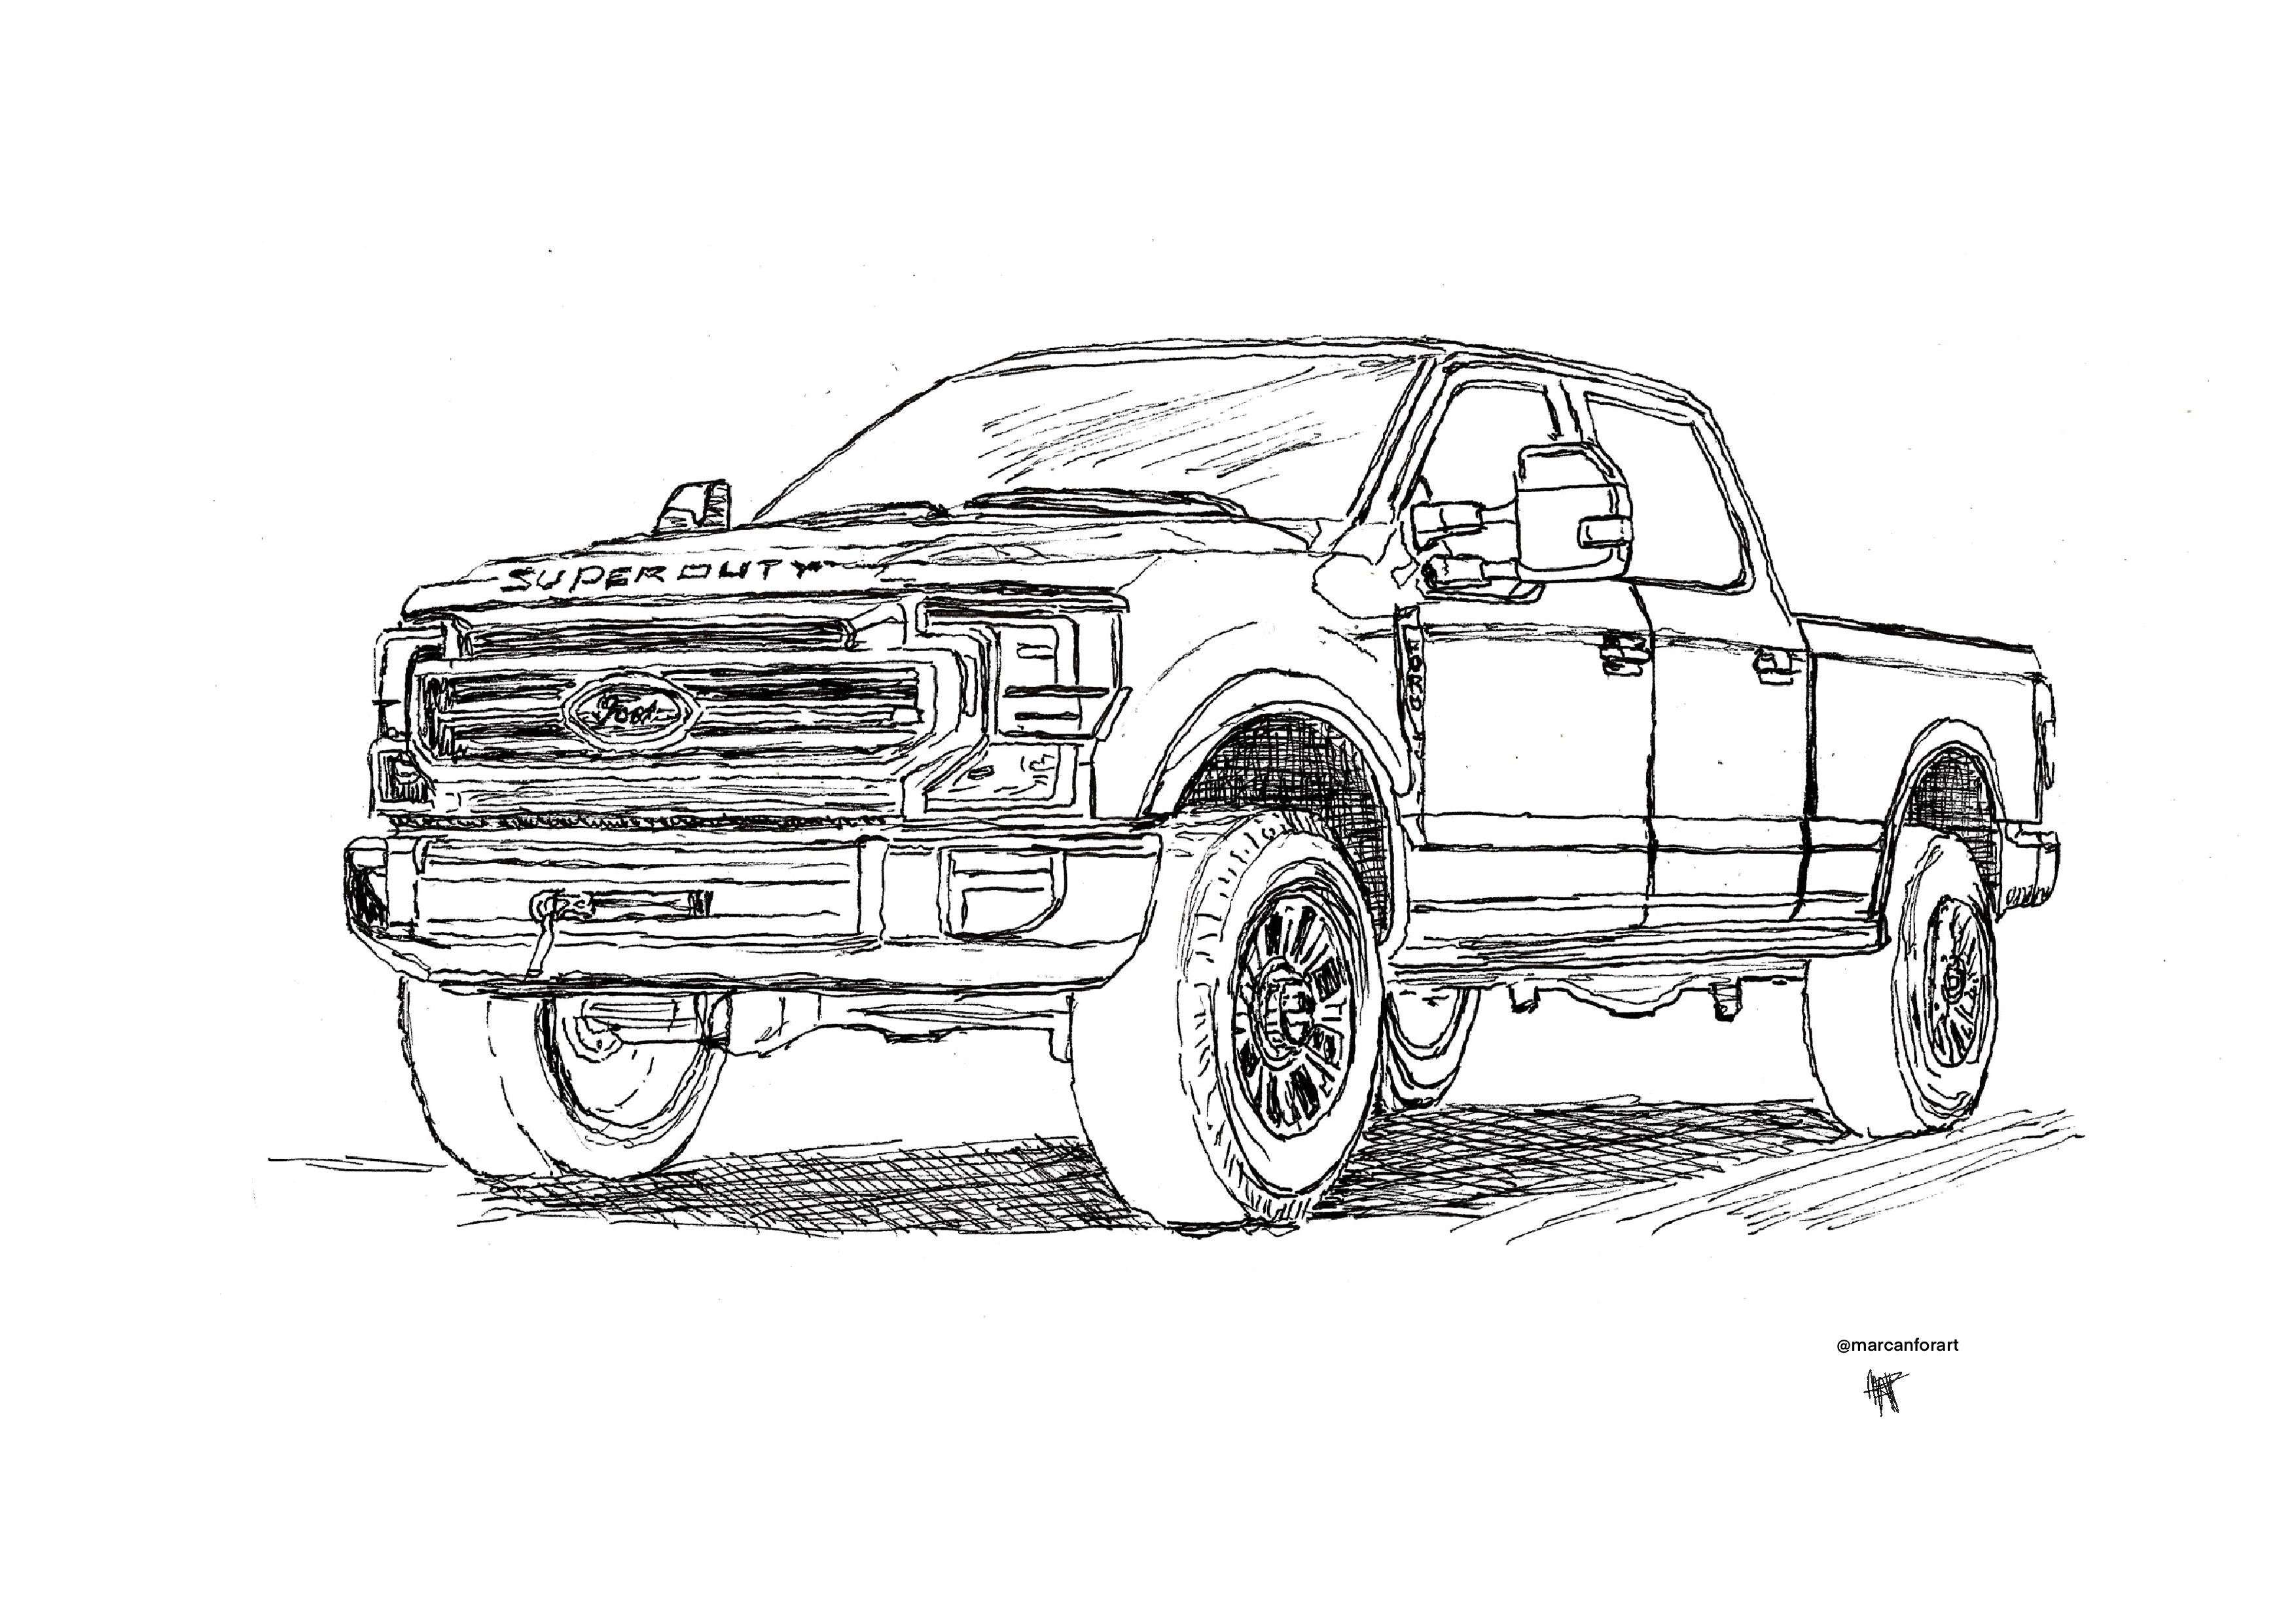 I sketched this super duty with ink to make a colouring page for the kids so here is a full size copy in case you or your kids would like to give